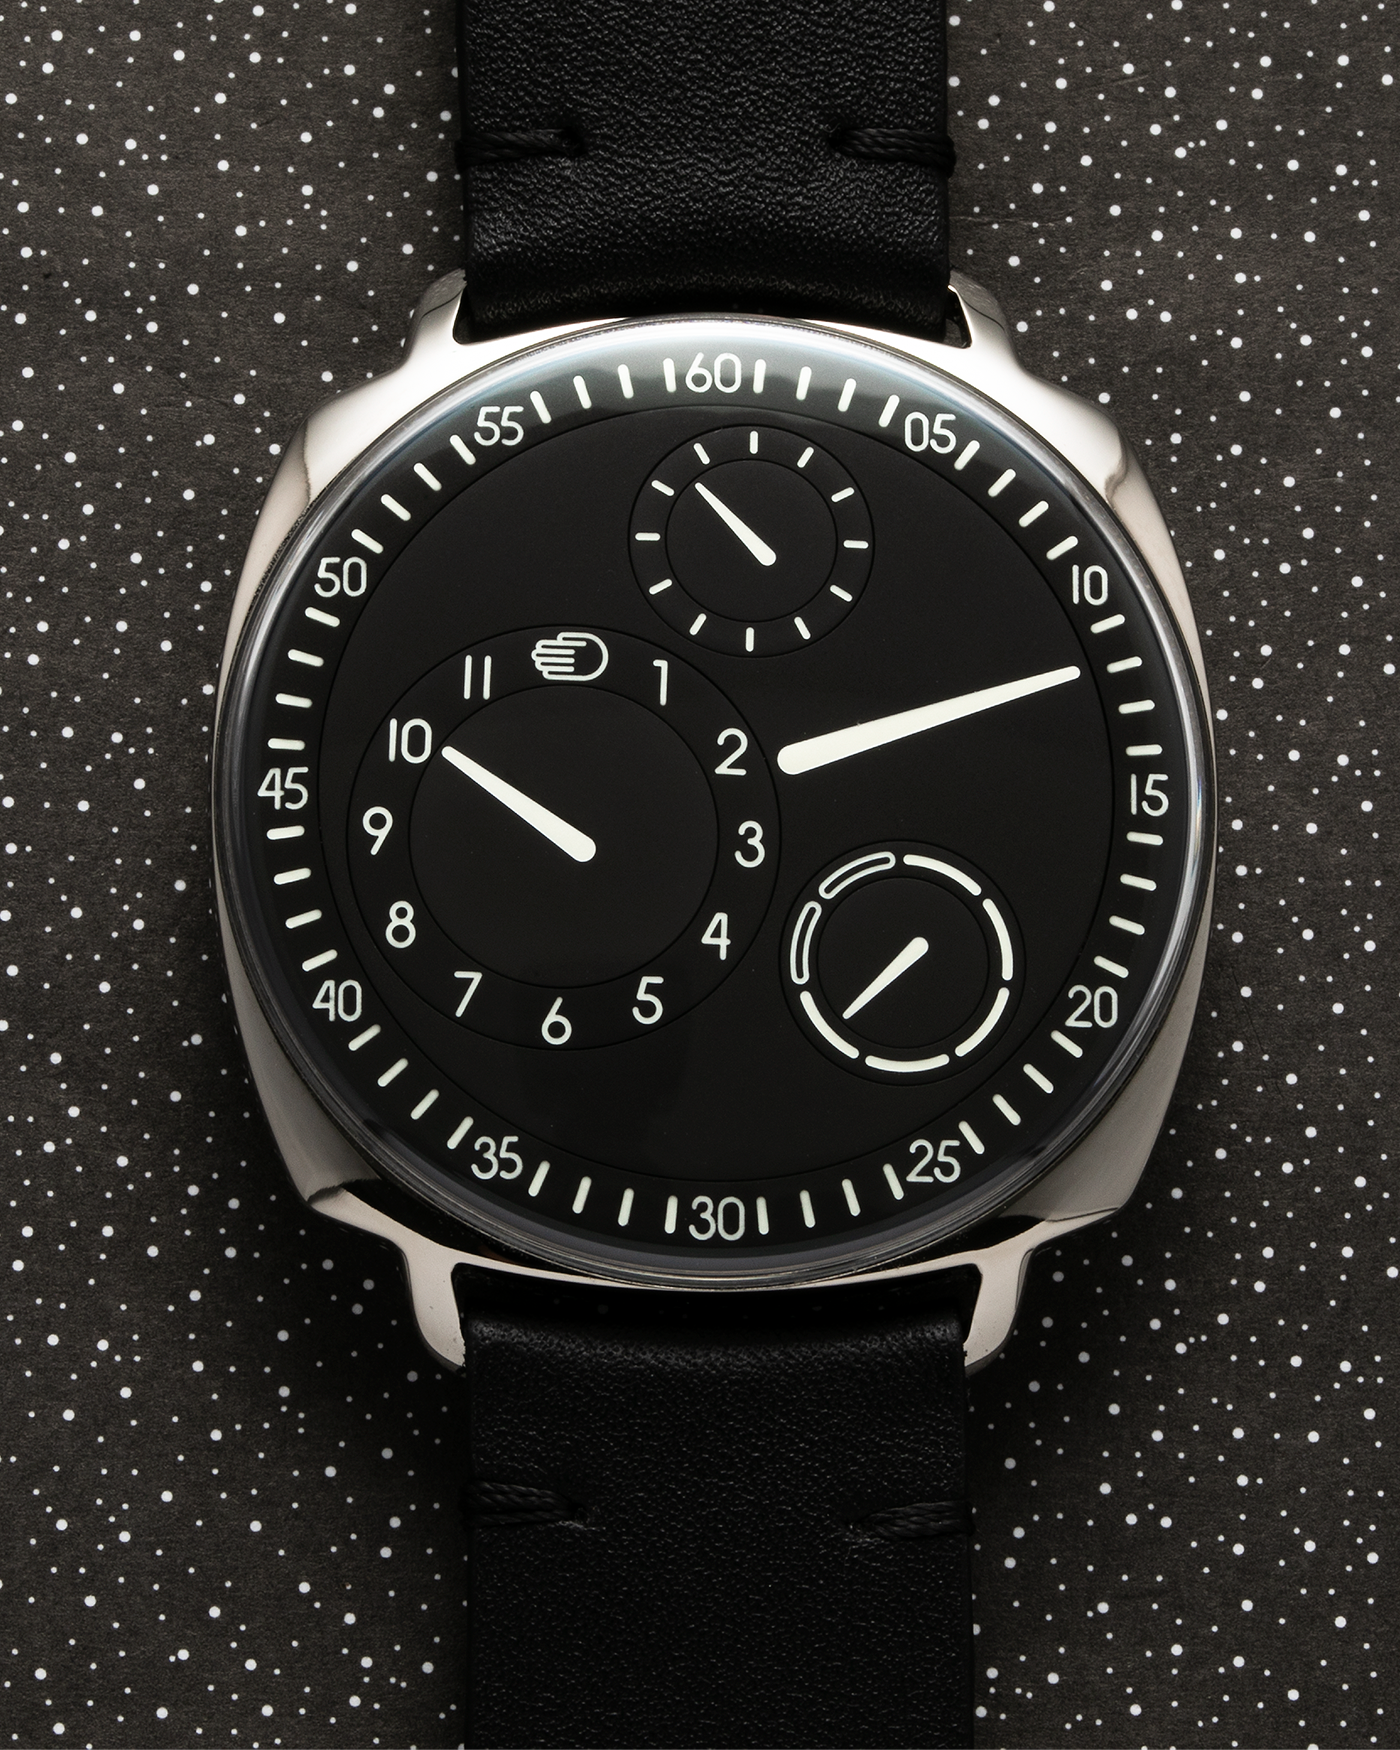 Brand: Ressence Year: 2022 Model: Type 1² Black Material: Polished Grade 5 Titanium with Satin Finished Caseback Movement: Customised ETA Cal. 2894/2 Base with In-House Patented Ressence Orbital Convex System (ROCS) 1 Module Driven by Minute Axle, Self-Winding Case Dimensions: 42mm Bracelet/Strap: Ressence Black Calf Leather Strap with Signed Ardillon Buckle